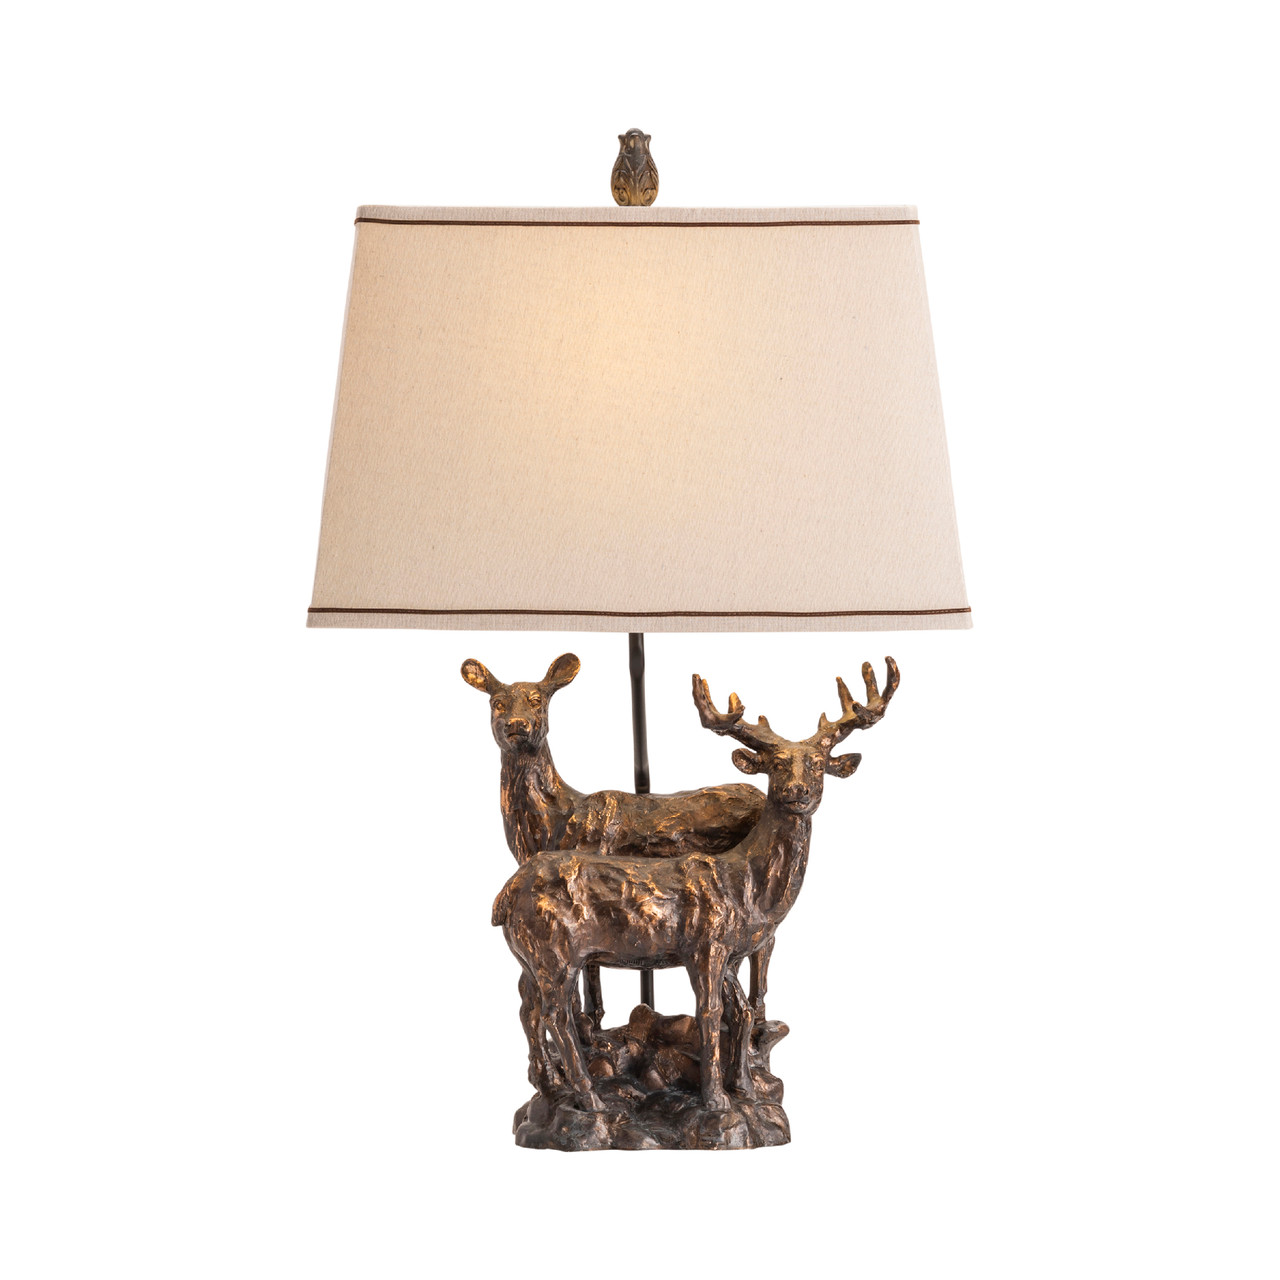 CRESTVIEW COLLECTION CVAVP1564 First Glance Table Lamp